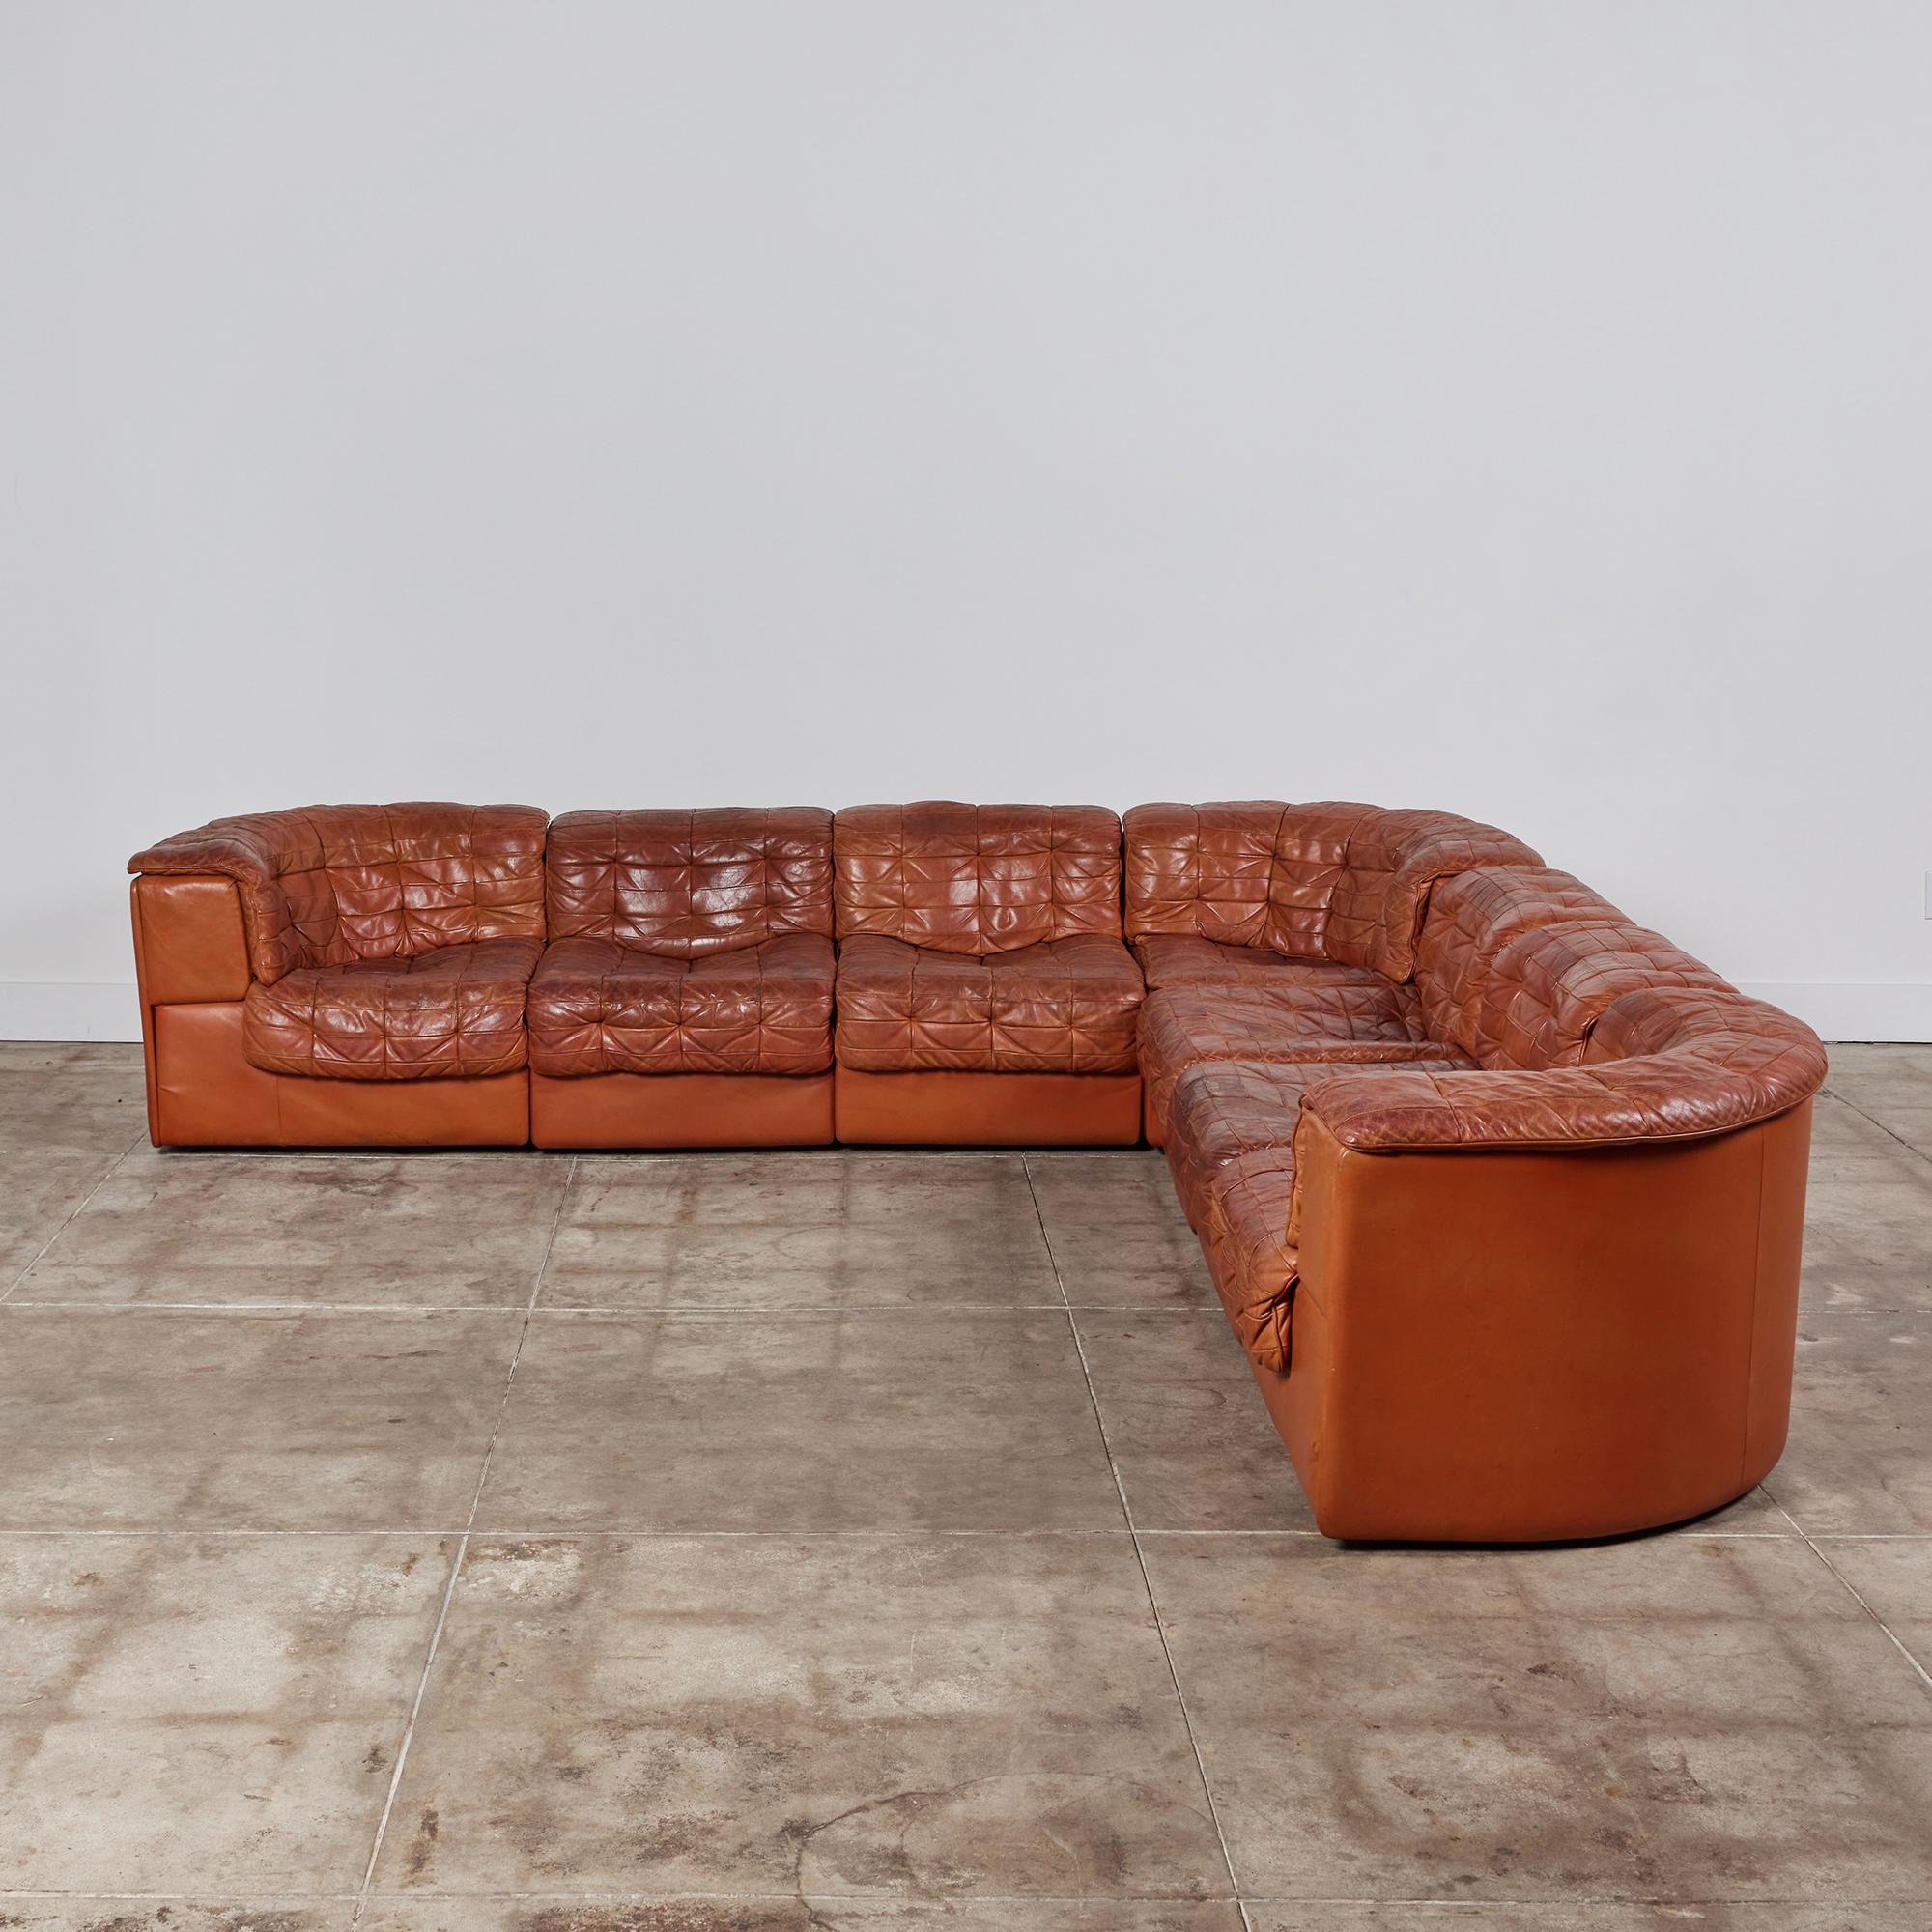 DS-11 cognac colored leather sofa circa 1970s, for De Sede, Switzerland. The modular system consists of three corner seats and four center seats all upholstered in the original perfectly patinated leather patchwork upholstery. It can be arranged as